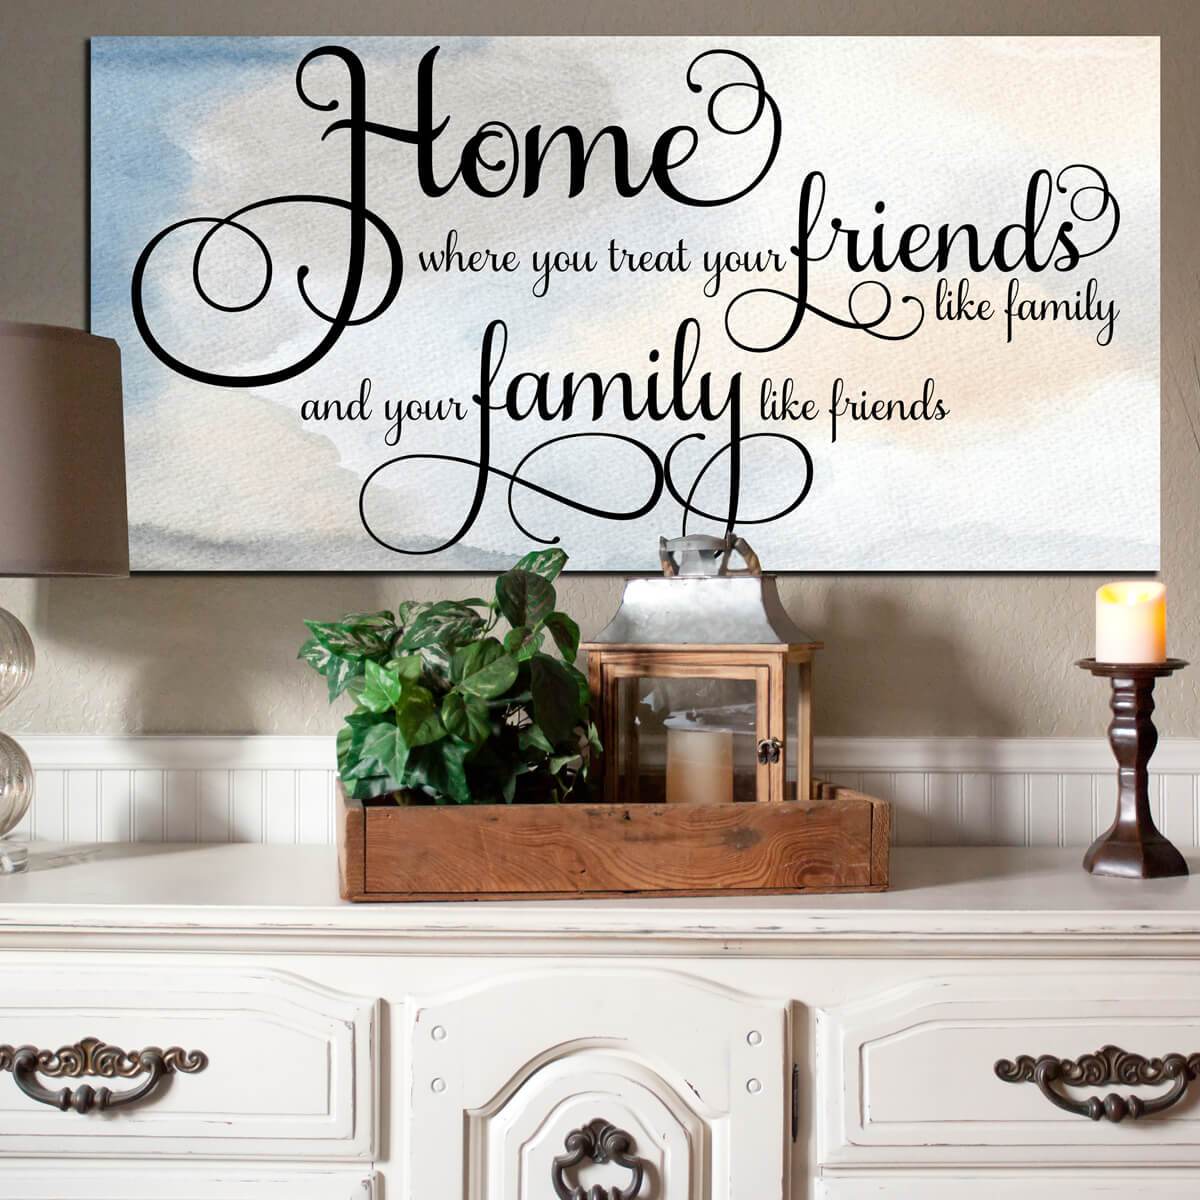 Home Is Where You Treat Your Friends Like Family – Artfily